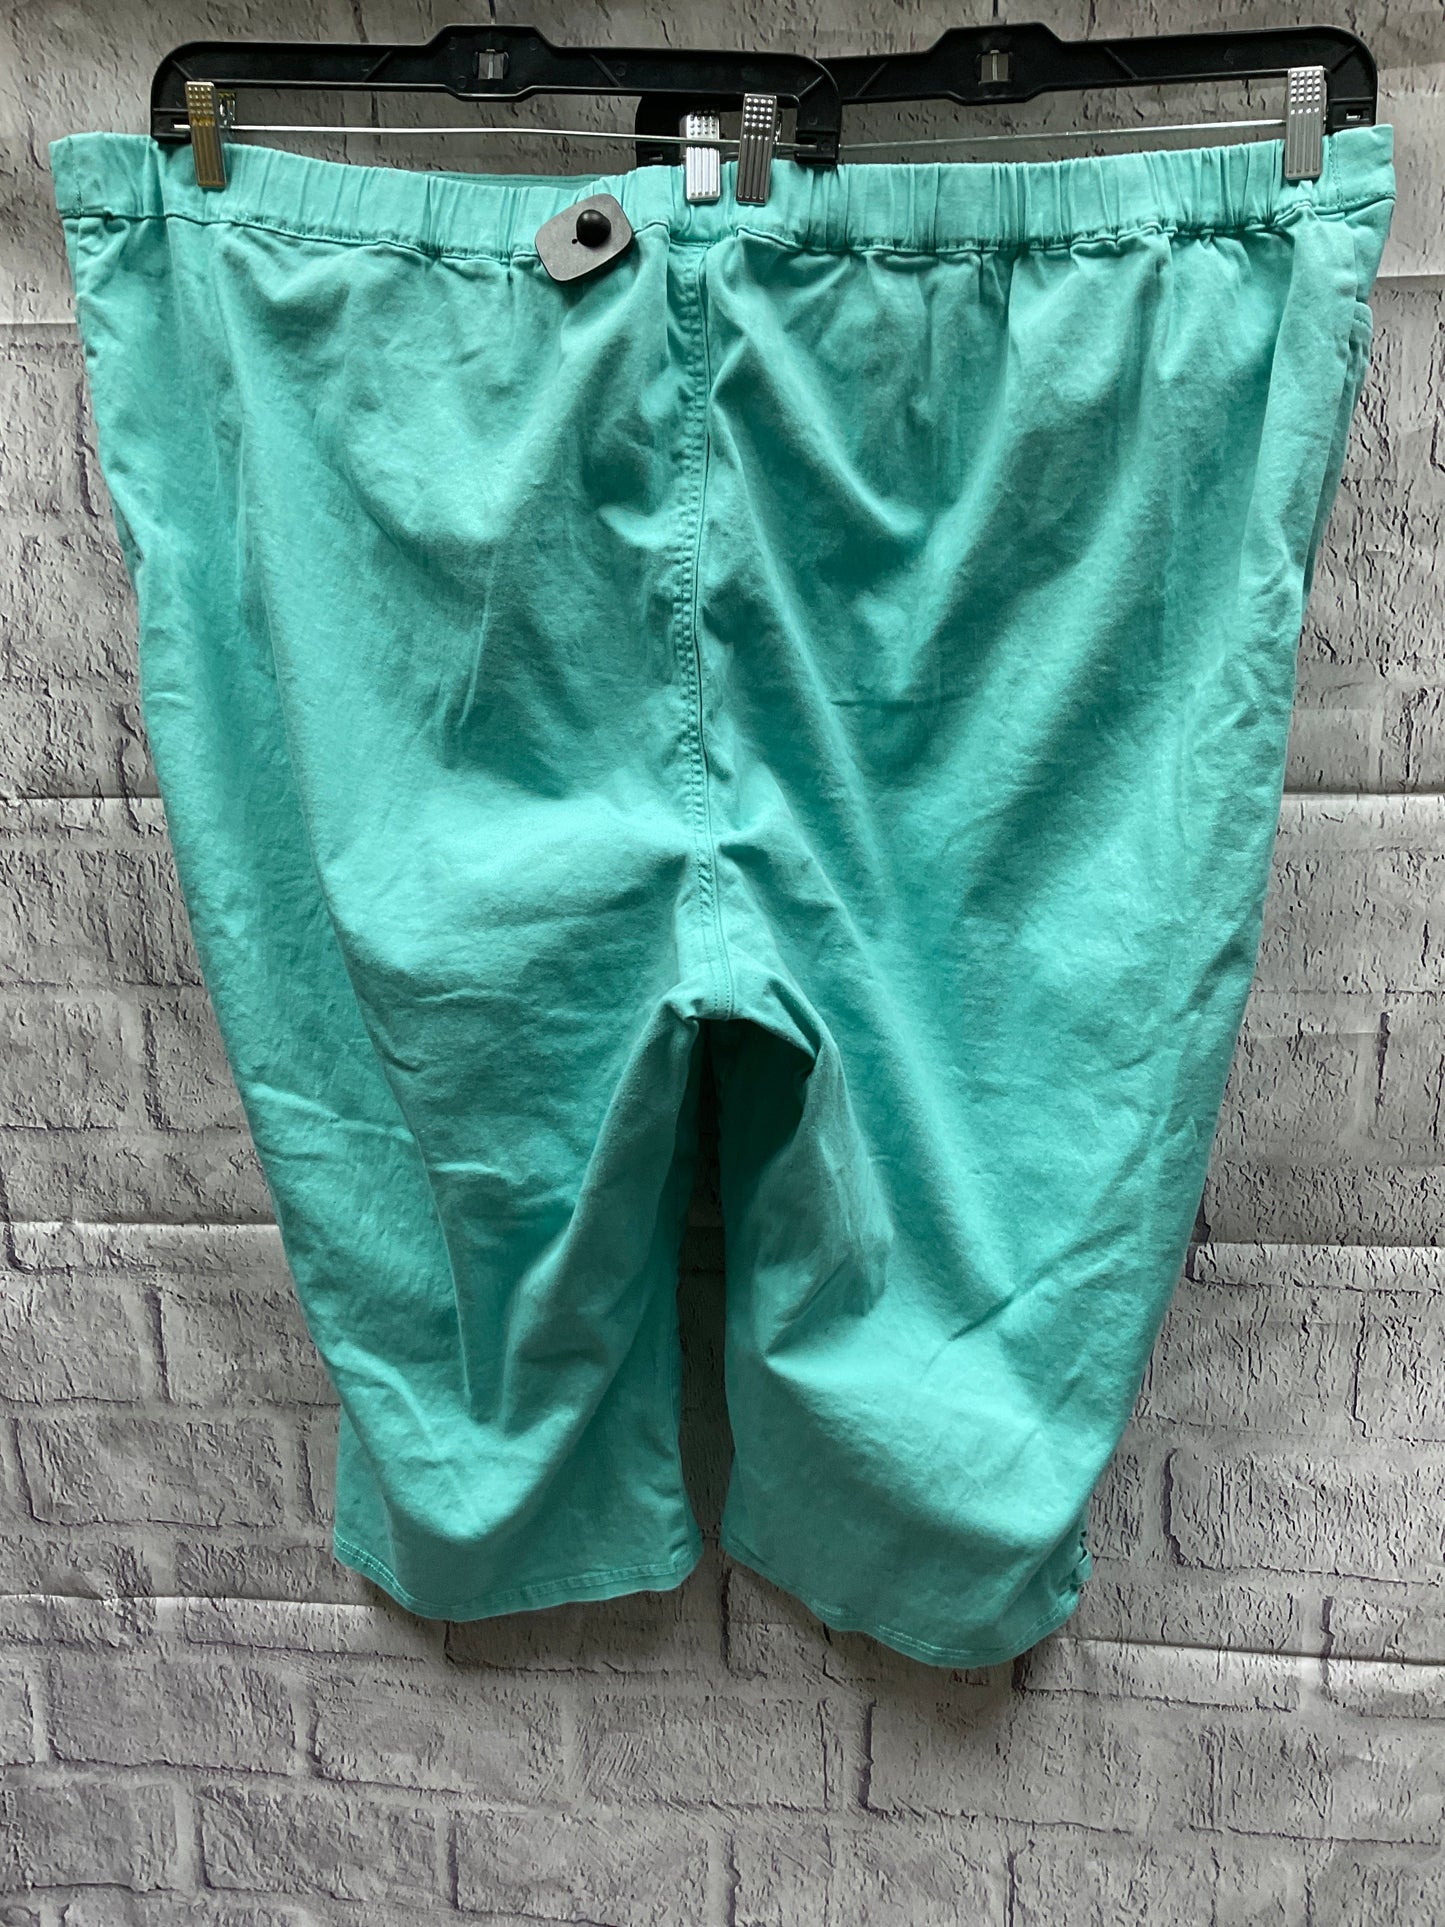 Capris By Catherines  Size: 34w